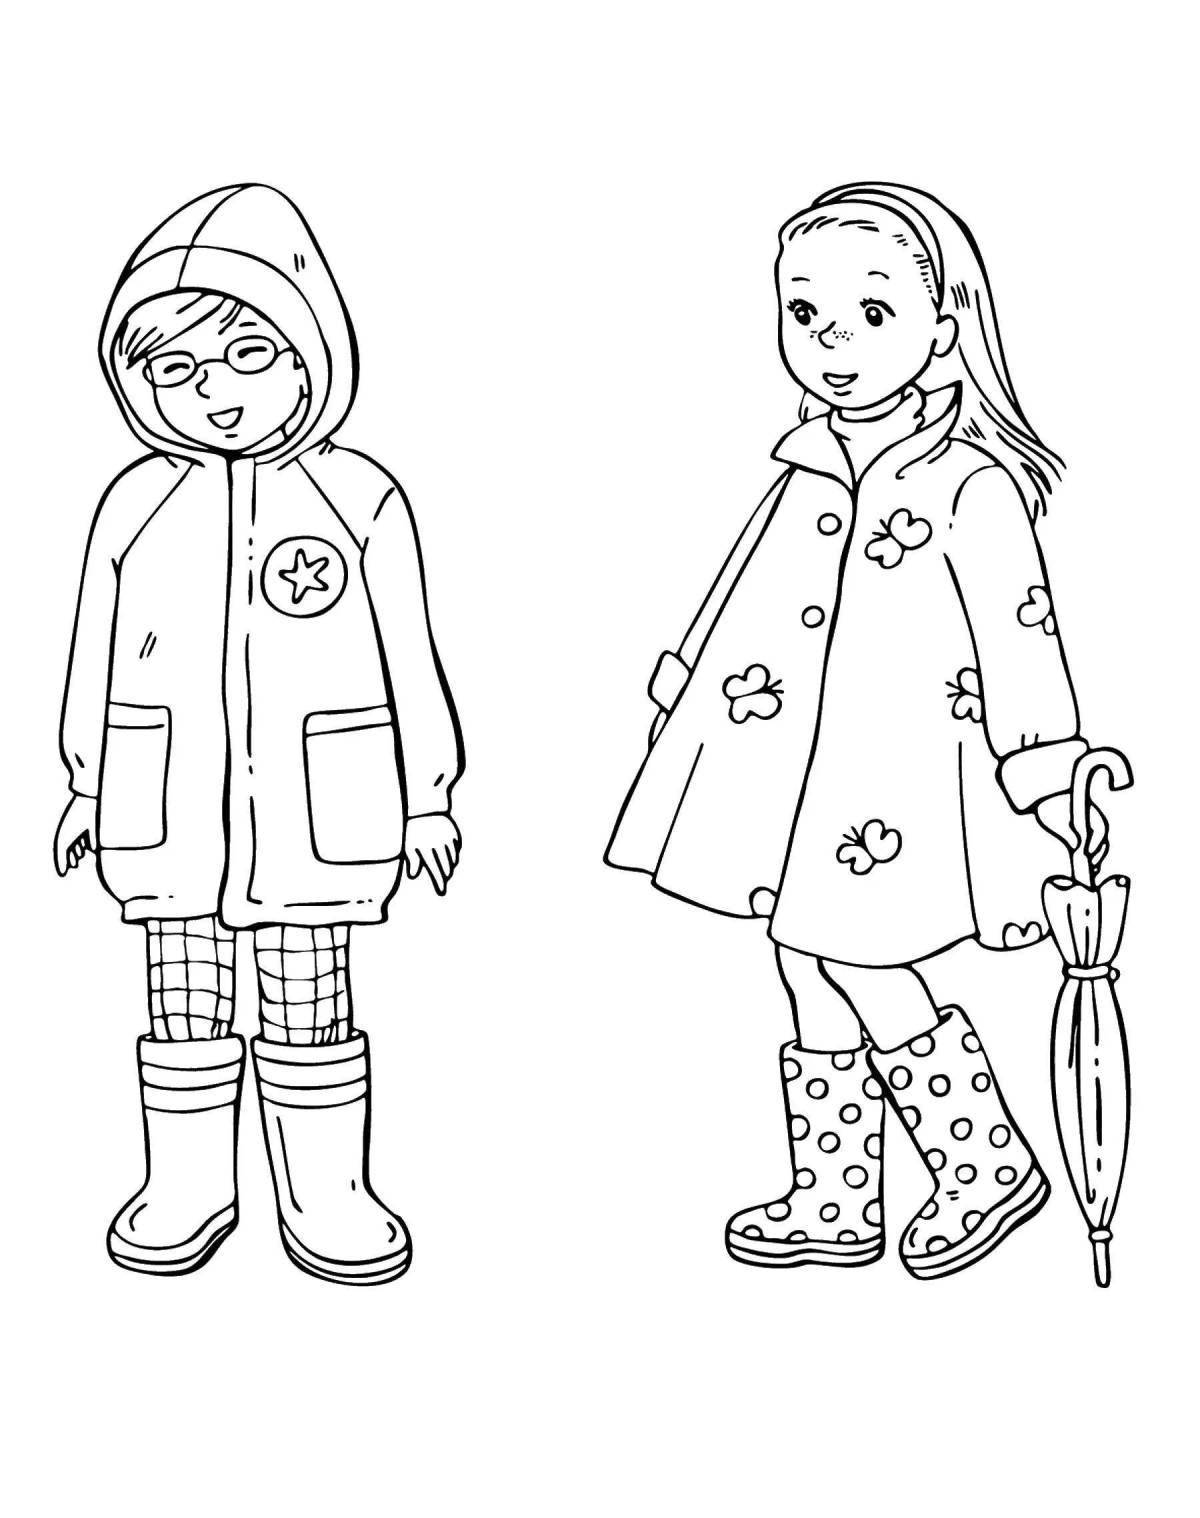 Coloring page adorable clothes for children 4-5 years old